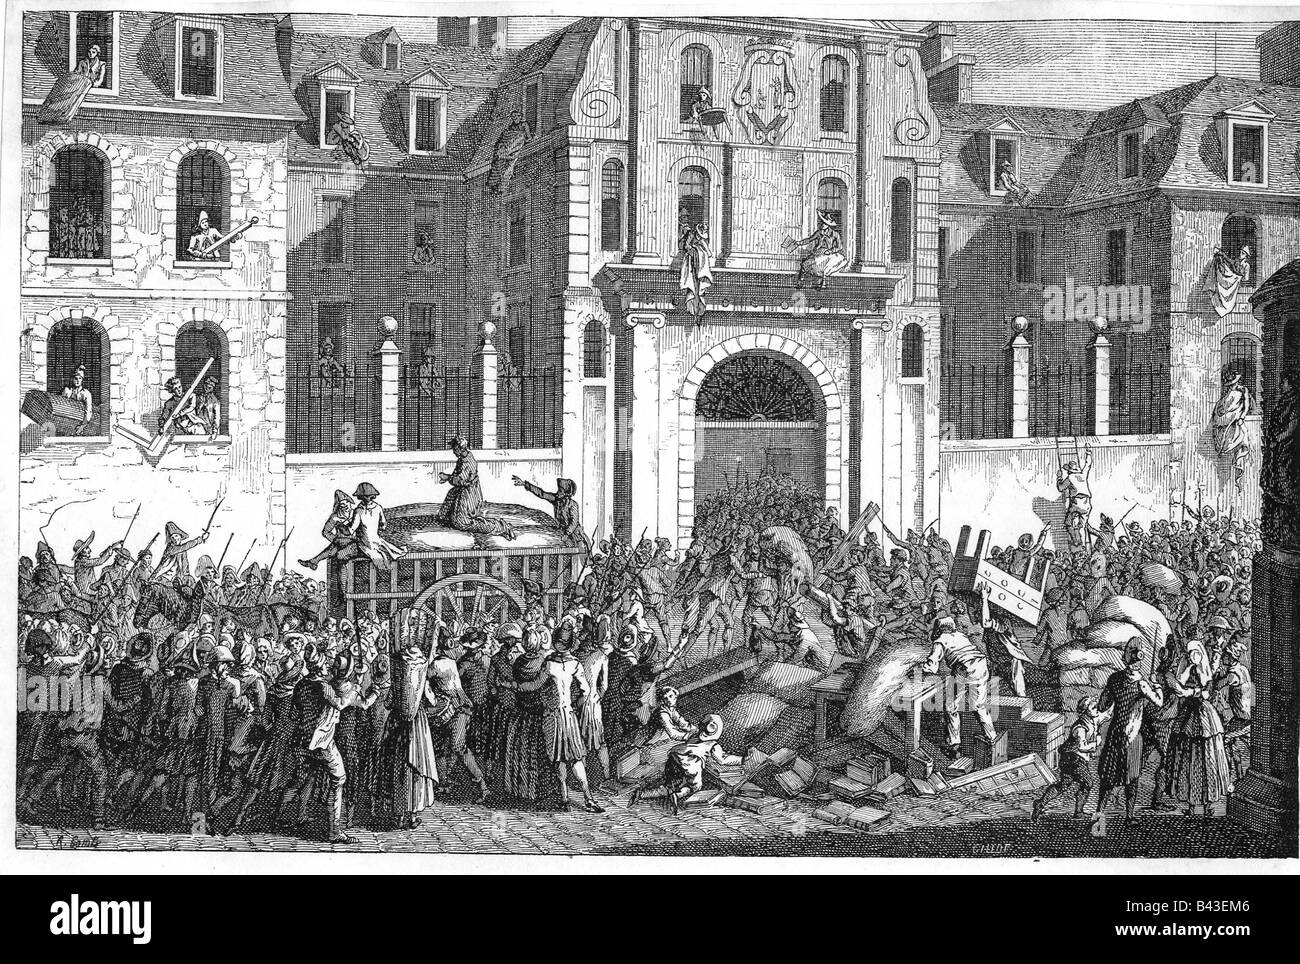 geography/travel, France, Revolution 1789 - 1799, looting of Maison da Saint Lazare, Paris, 13.7.1789, contemporary engraving, 18th century, historic, historical, people, Stock Photo